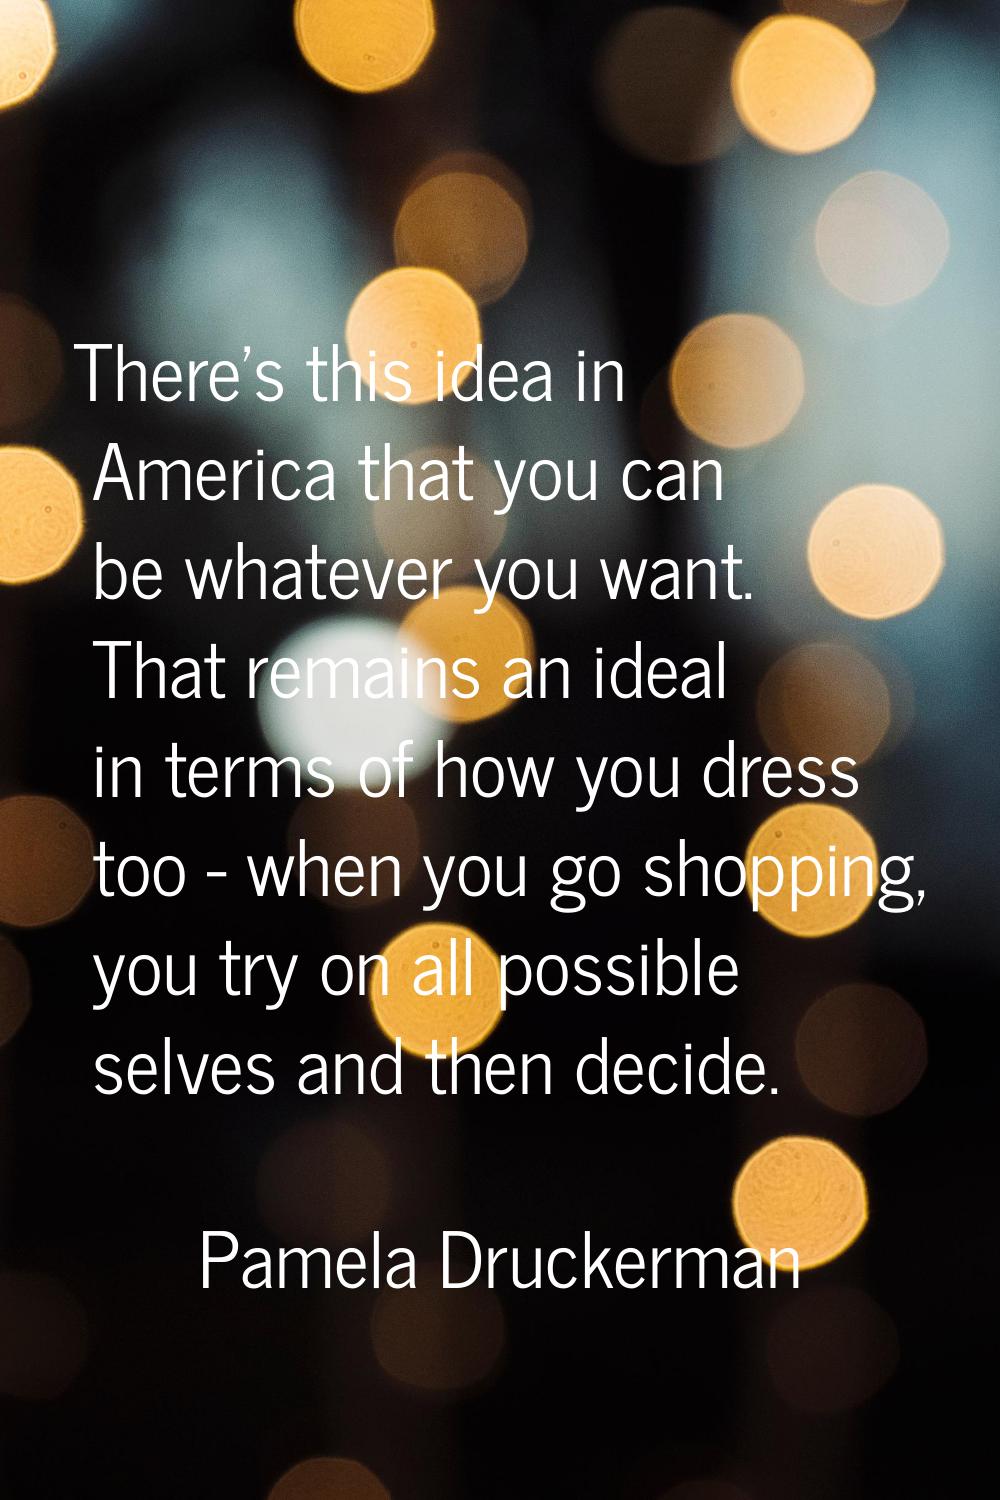 There's this idea in America that you can be whatever you want. That remains an ideal in terms of h